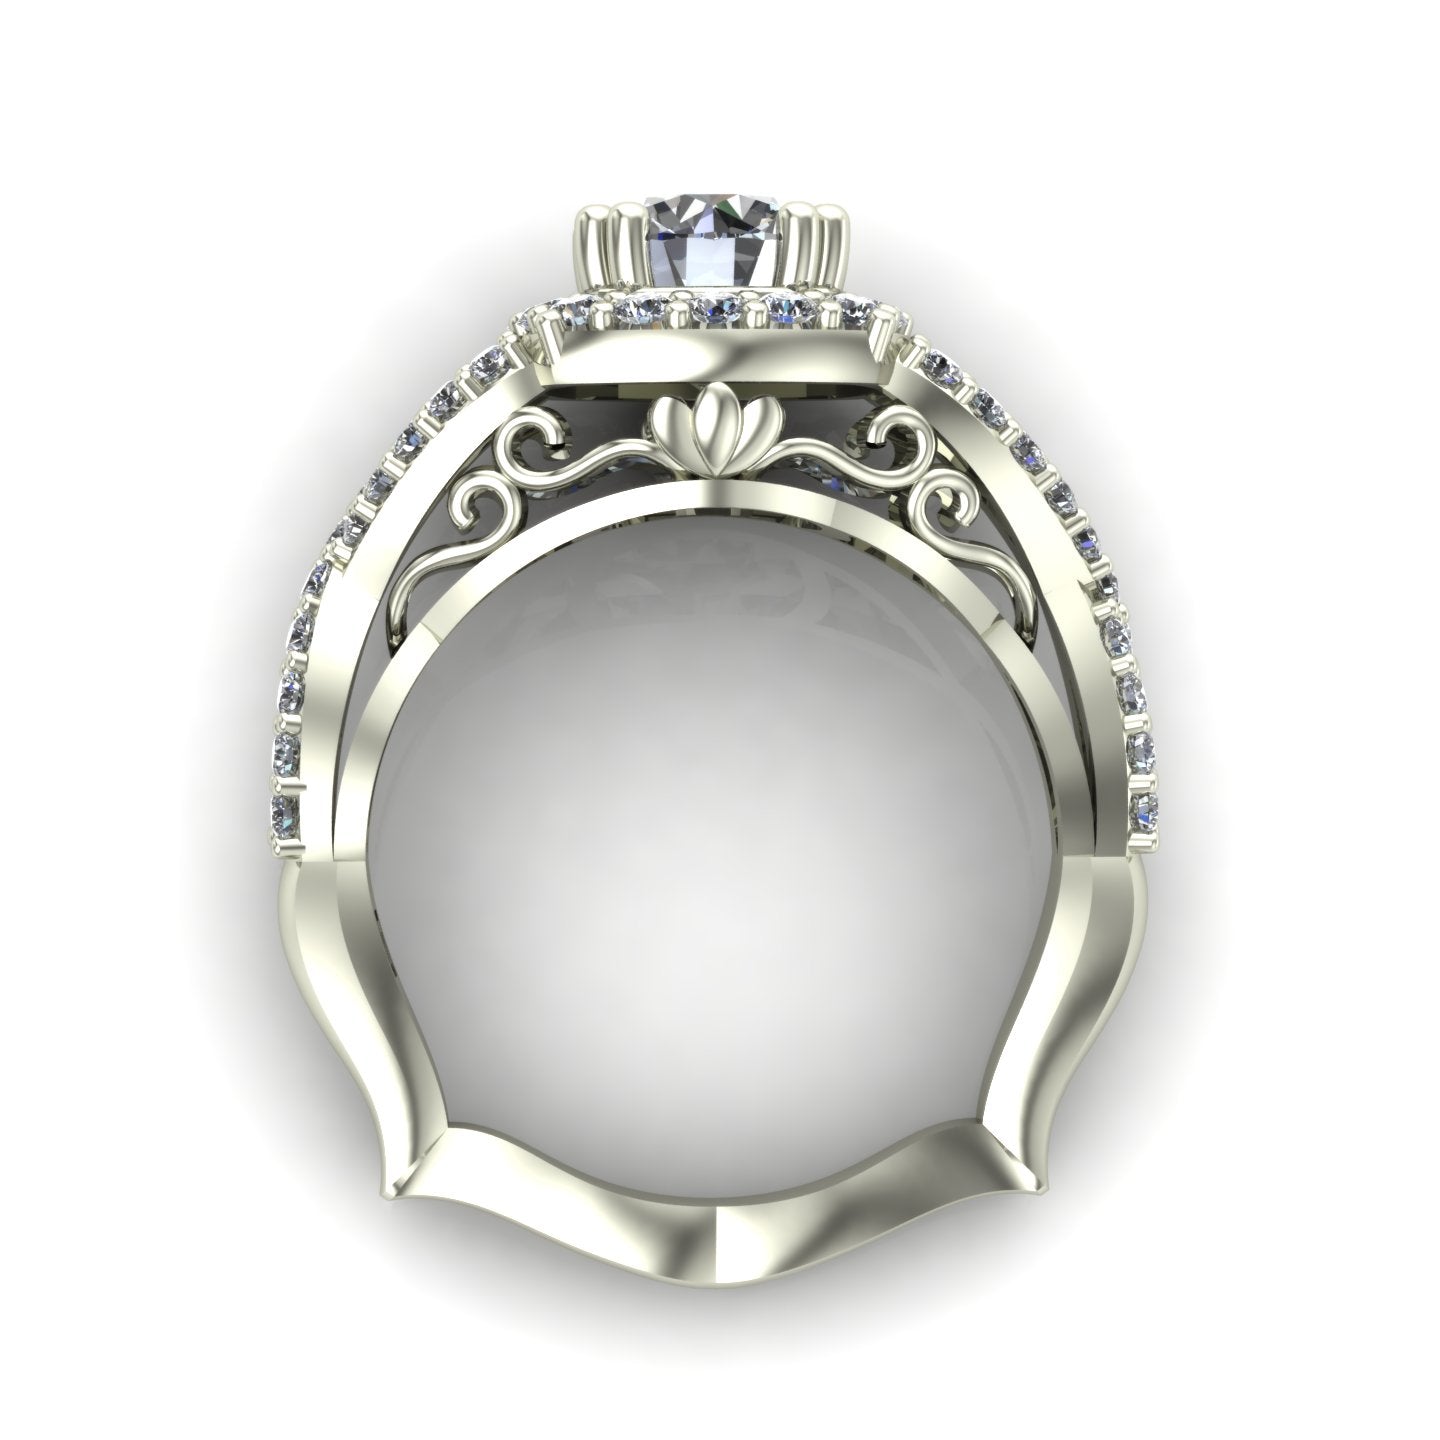 1ct diamond engagement ring cushion halo crossover shank 14k white gold - Charles Babb Designs - through finger view